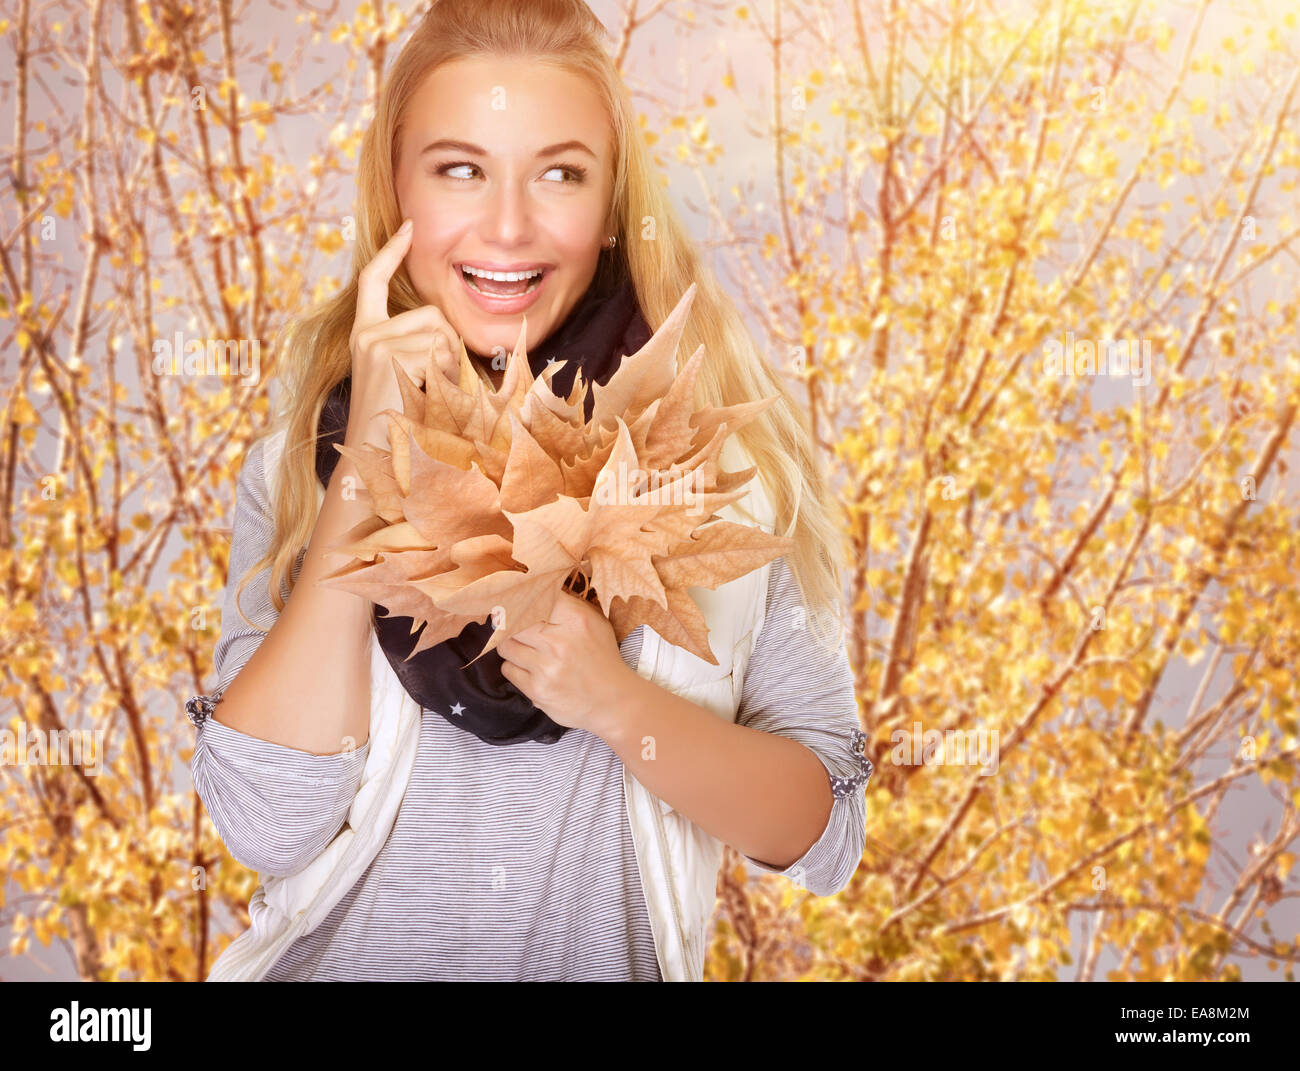 Portrait of cute happy girl with dry maple leaves bouquet in the park, spending time outdoors, enjoying autumn concept Stock Photo